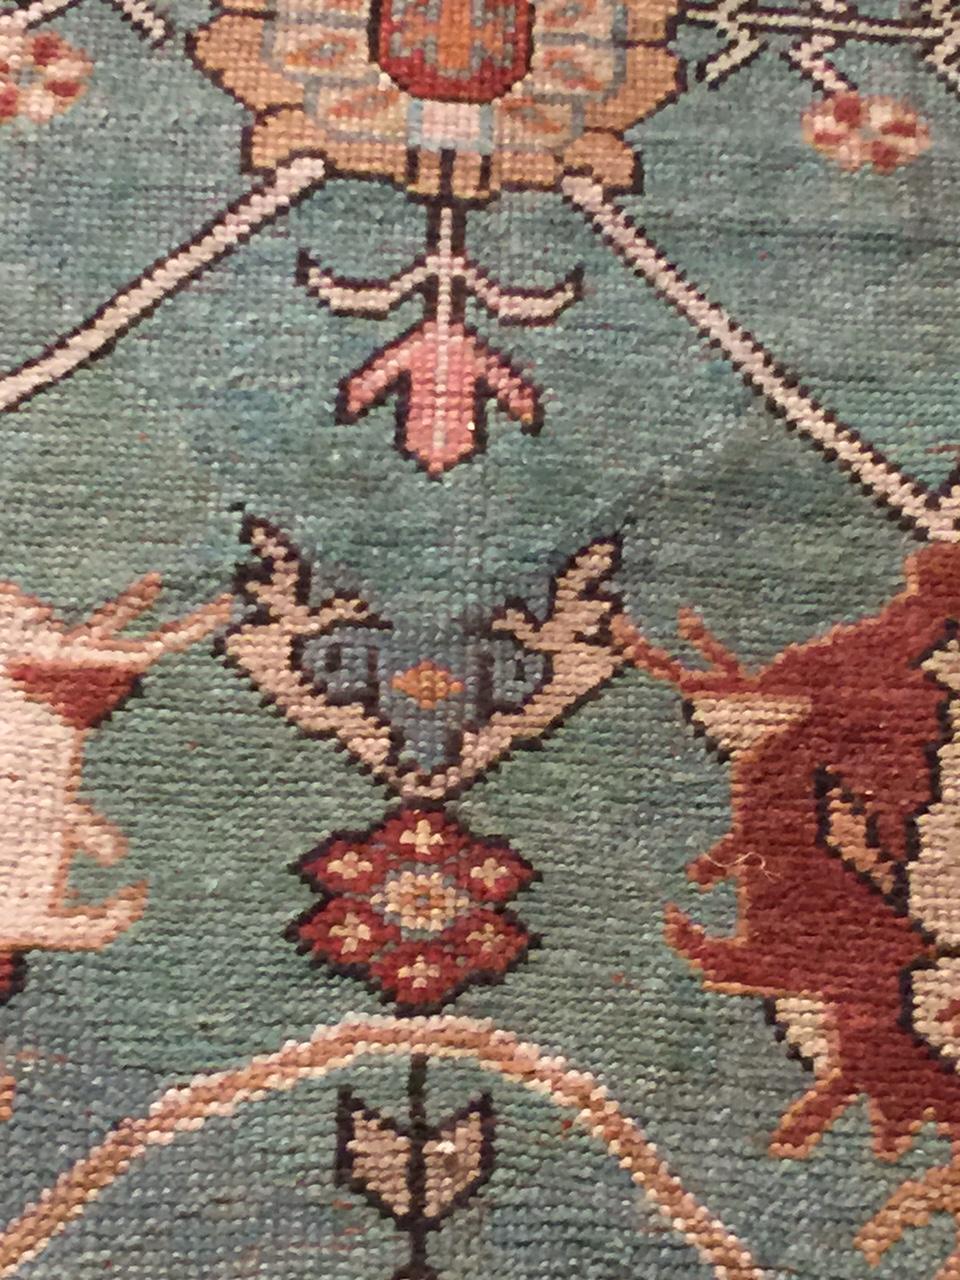 Antique Turquoise Oushak Rug  8'6 x 12'5. Oushak's are known for their soft palettes combined with eccentric drawing. Oushak in western Turkey has the longest continuous rug weaving history, stretching back at least to the mid-fifteenth century. It